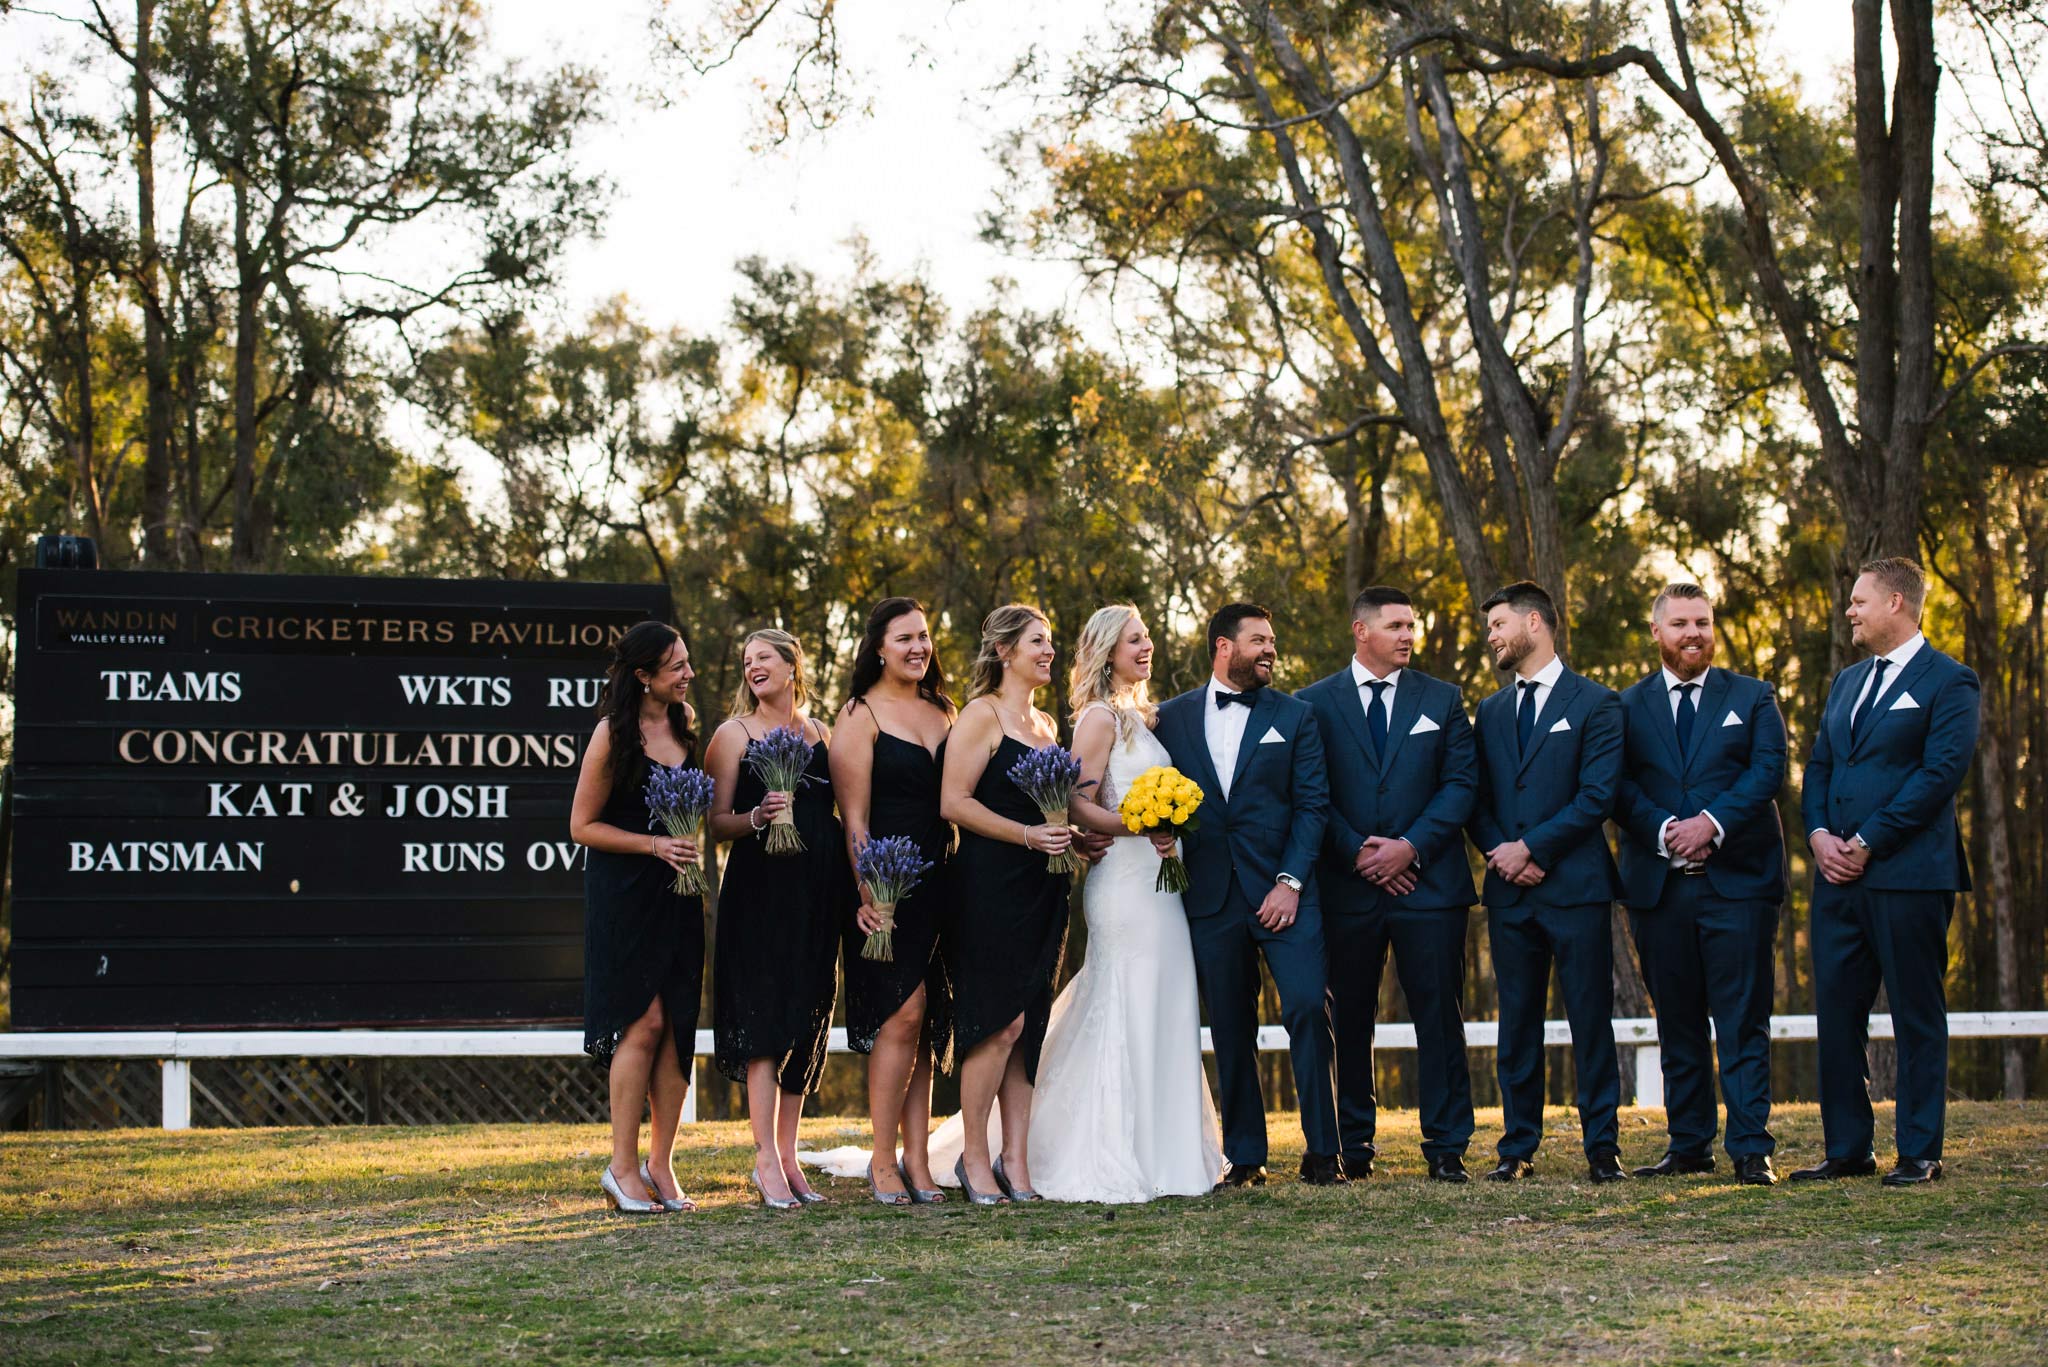 Bridal party in field at Wandin Valley Estate wedding with cricket score board in background